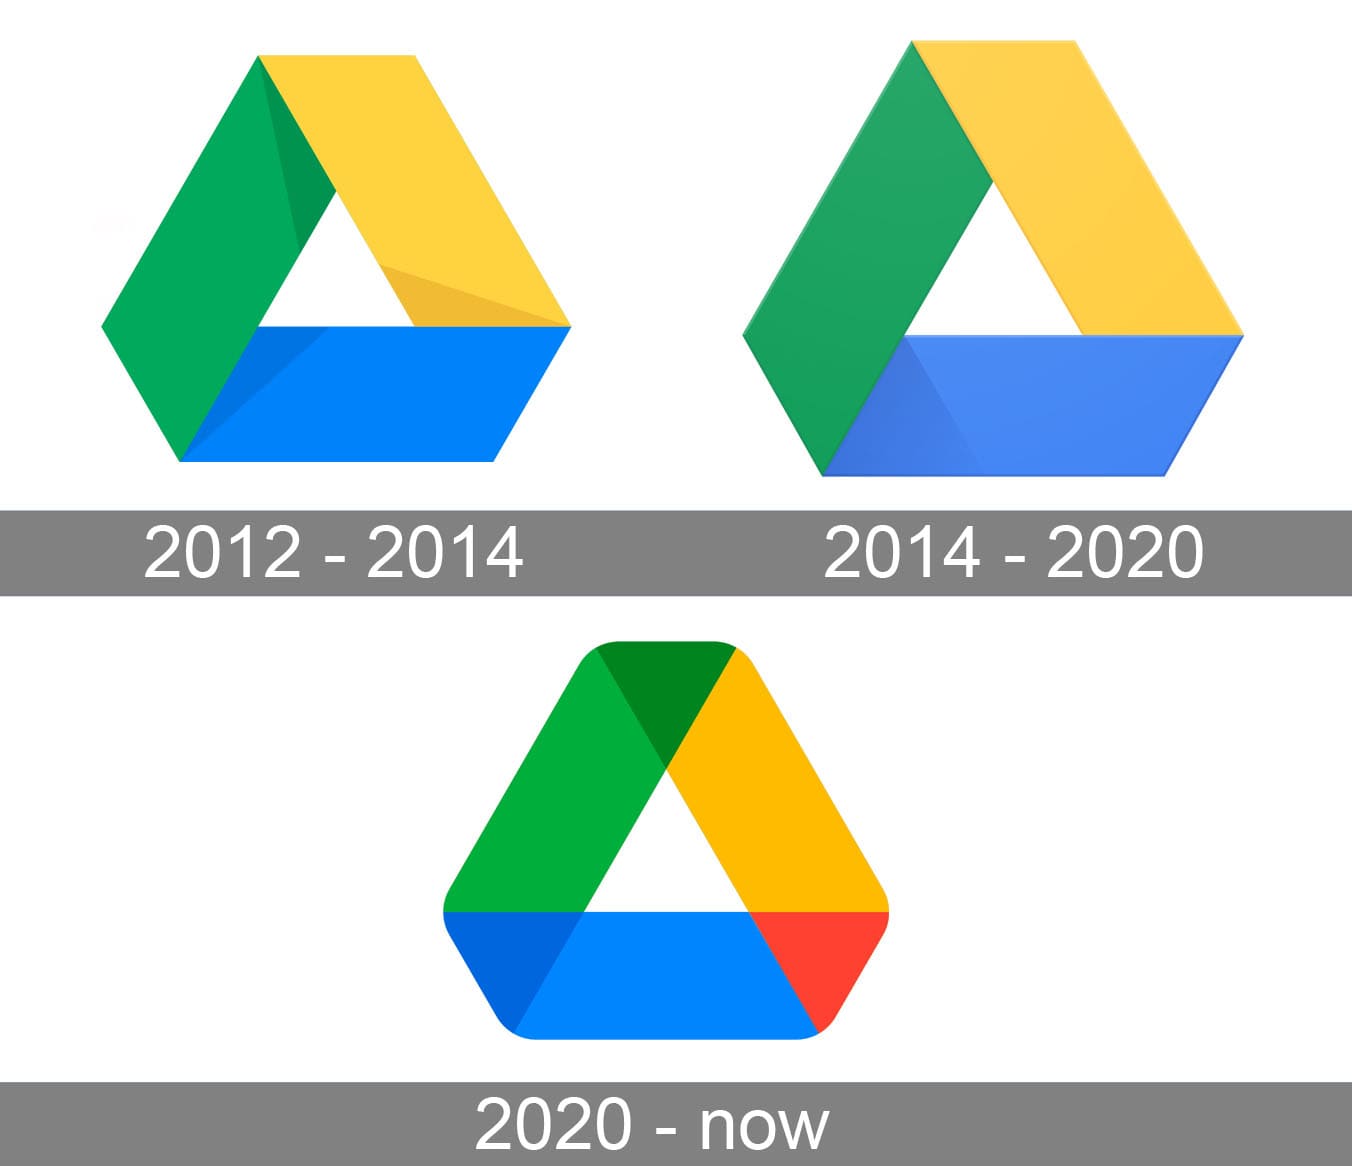 Has Google Drive changed its name?